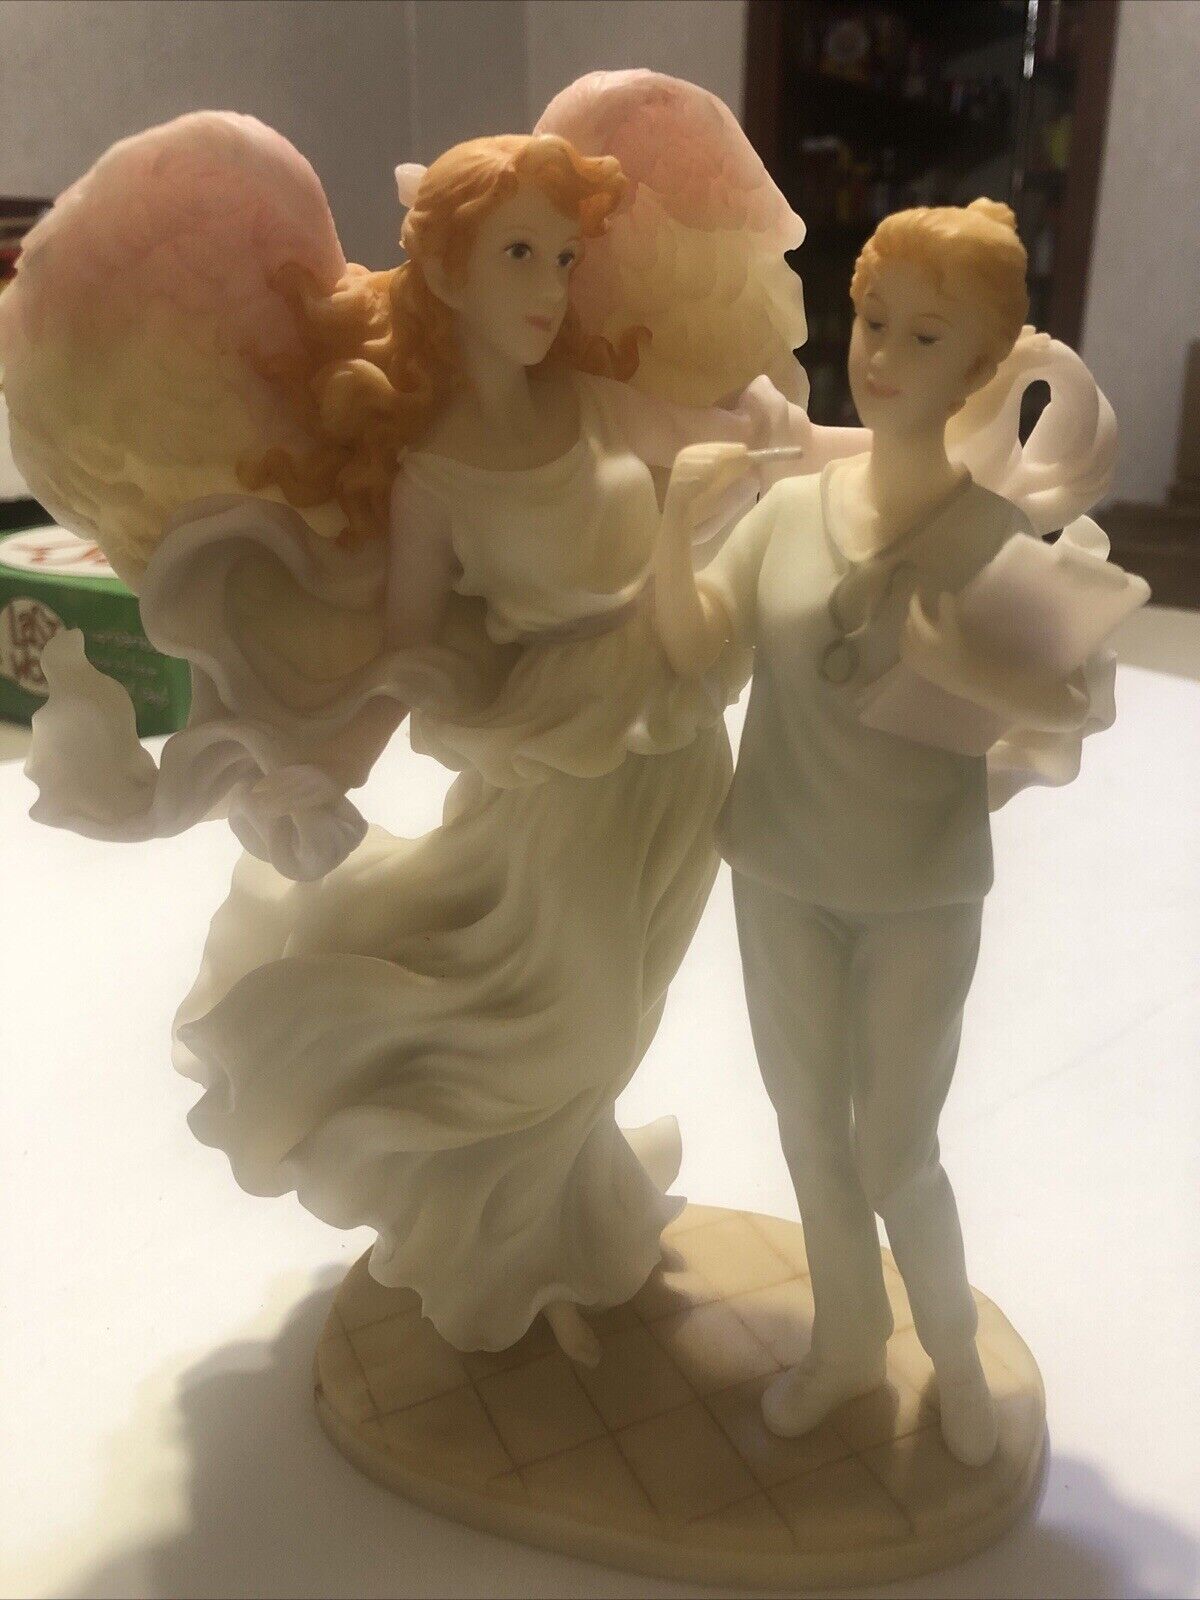 2001 Seraphim Classics caring touch angel with nurse ~ Item #81802 by Roman Inc.